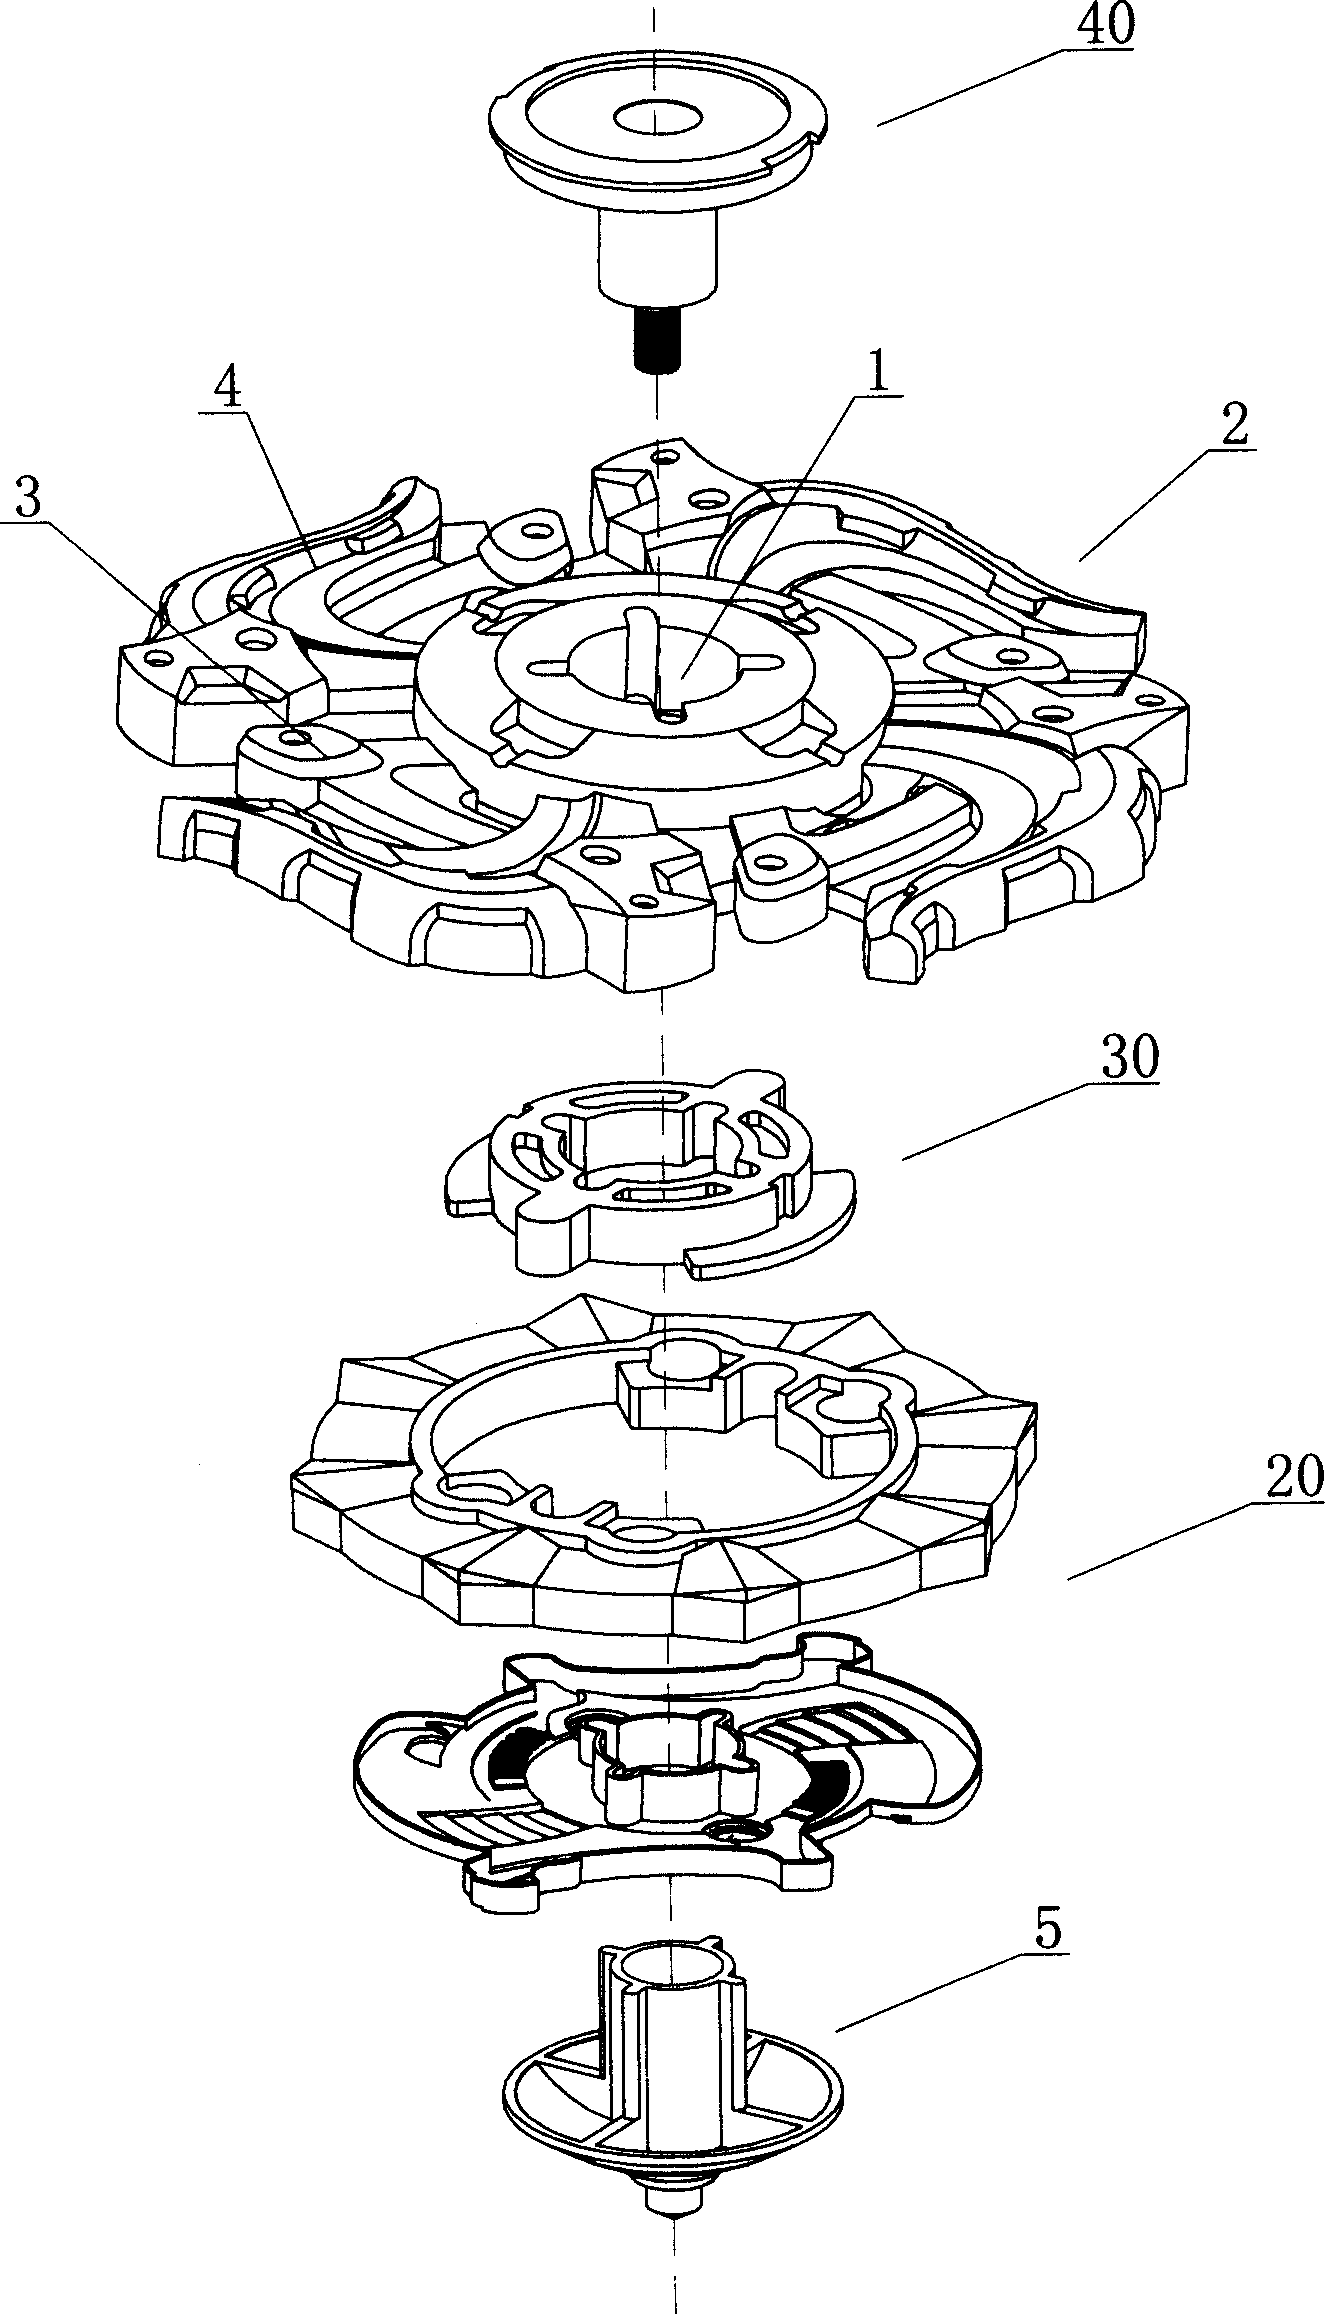 Assembled gyroscope piece structure